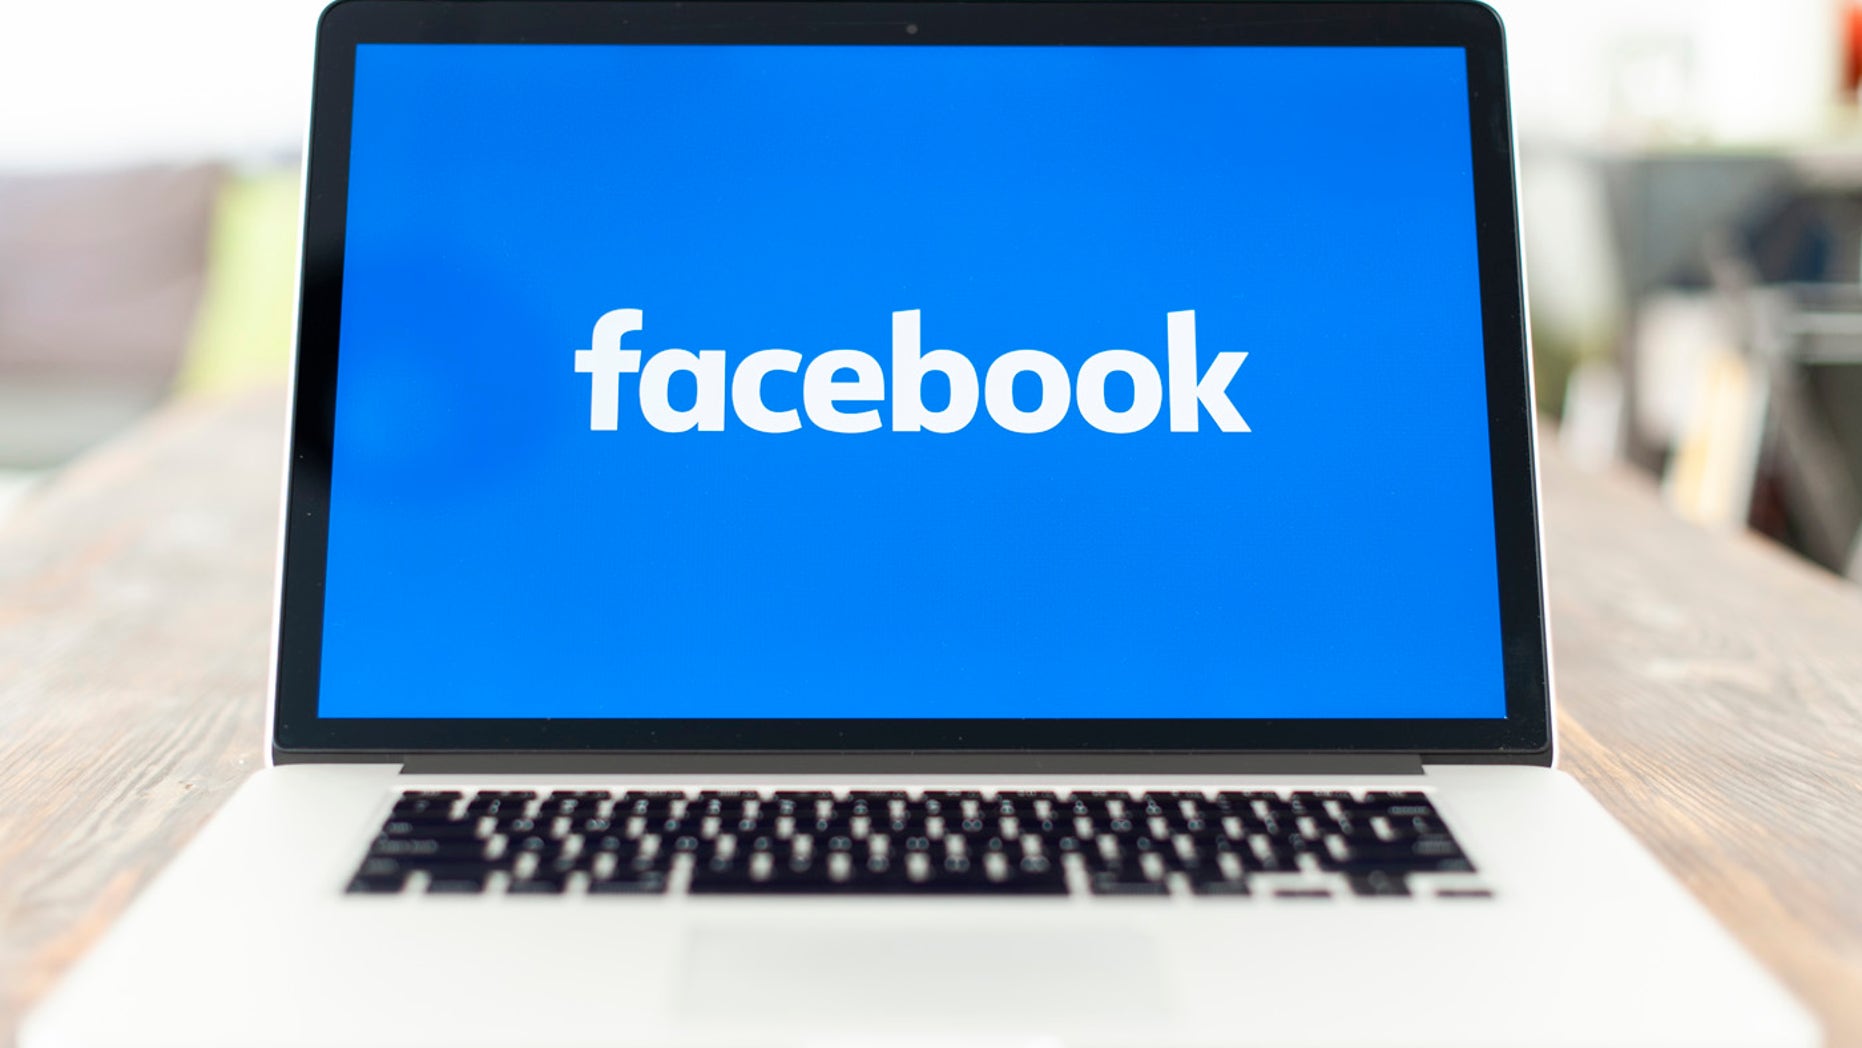 Facebook, Instagram and Whatsapp were partially down Wednesday afternoon for some users of the world, and the disruption lasted for several hours, according to a website where users can report their problems with other sites and apps. (Photo by Jaap Arriens / NurPhoto via Getty Images)